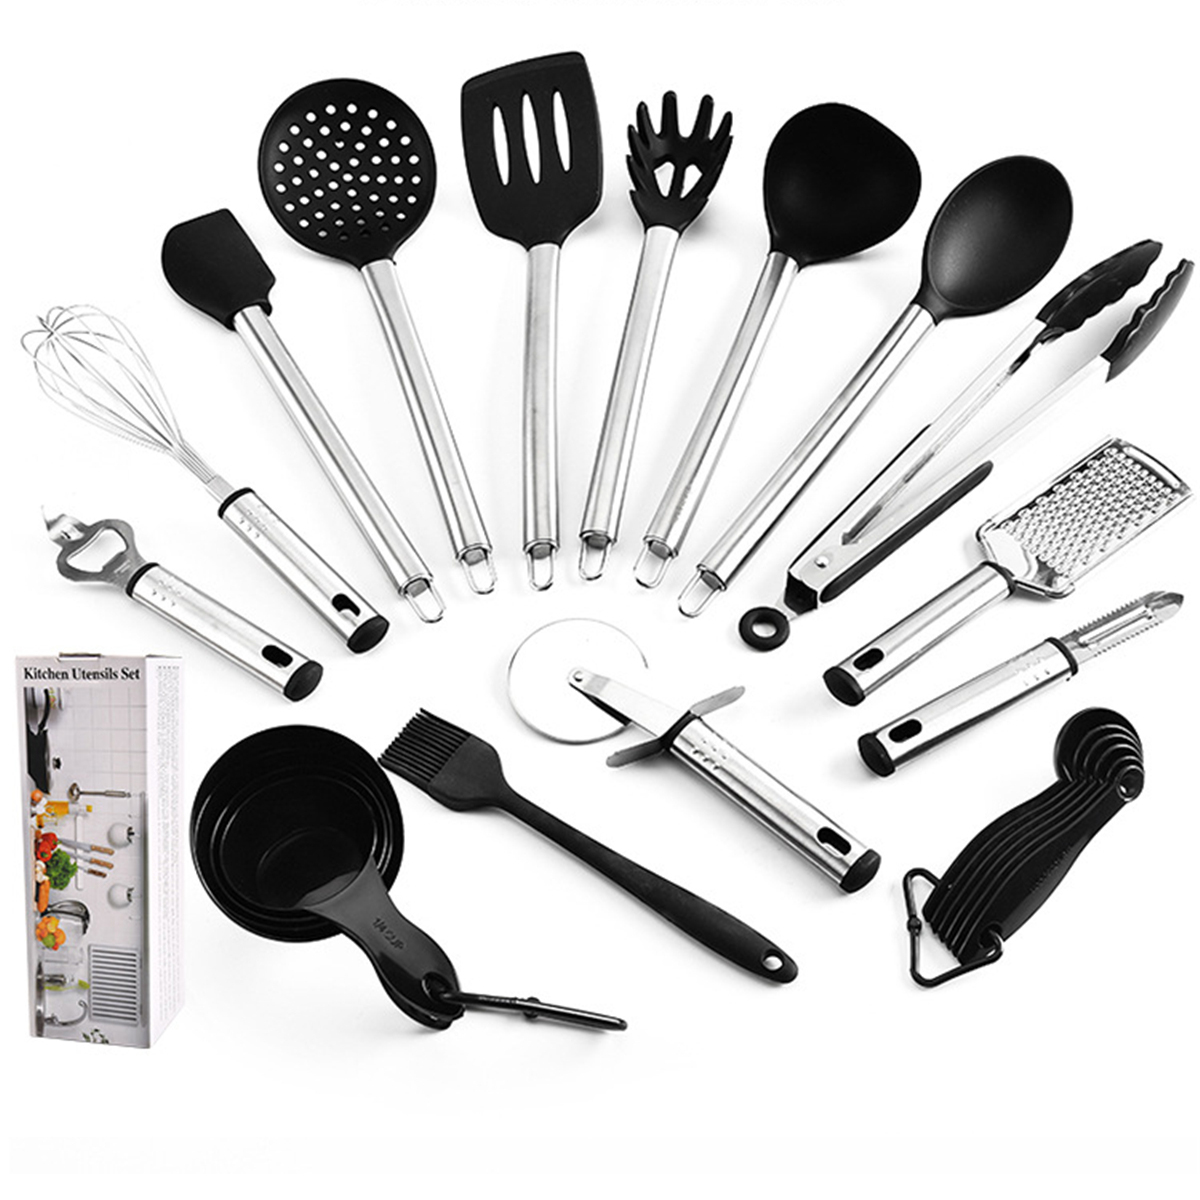 23pcs-Steel-Handle-Silicone-Non-Stick-Pan-Spoon-Utensils-Kitchenware-Cookware-1686237-2